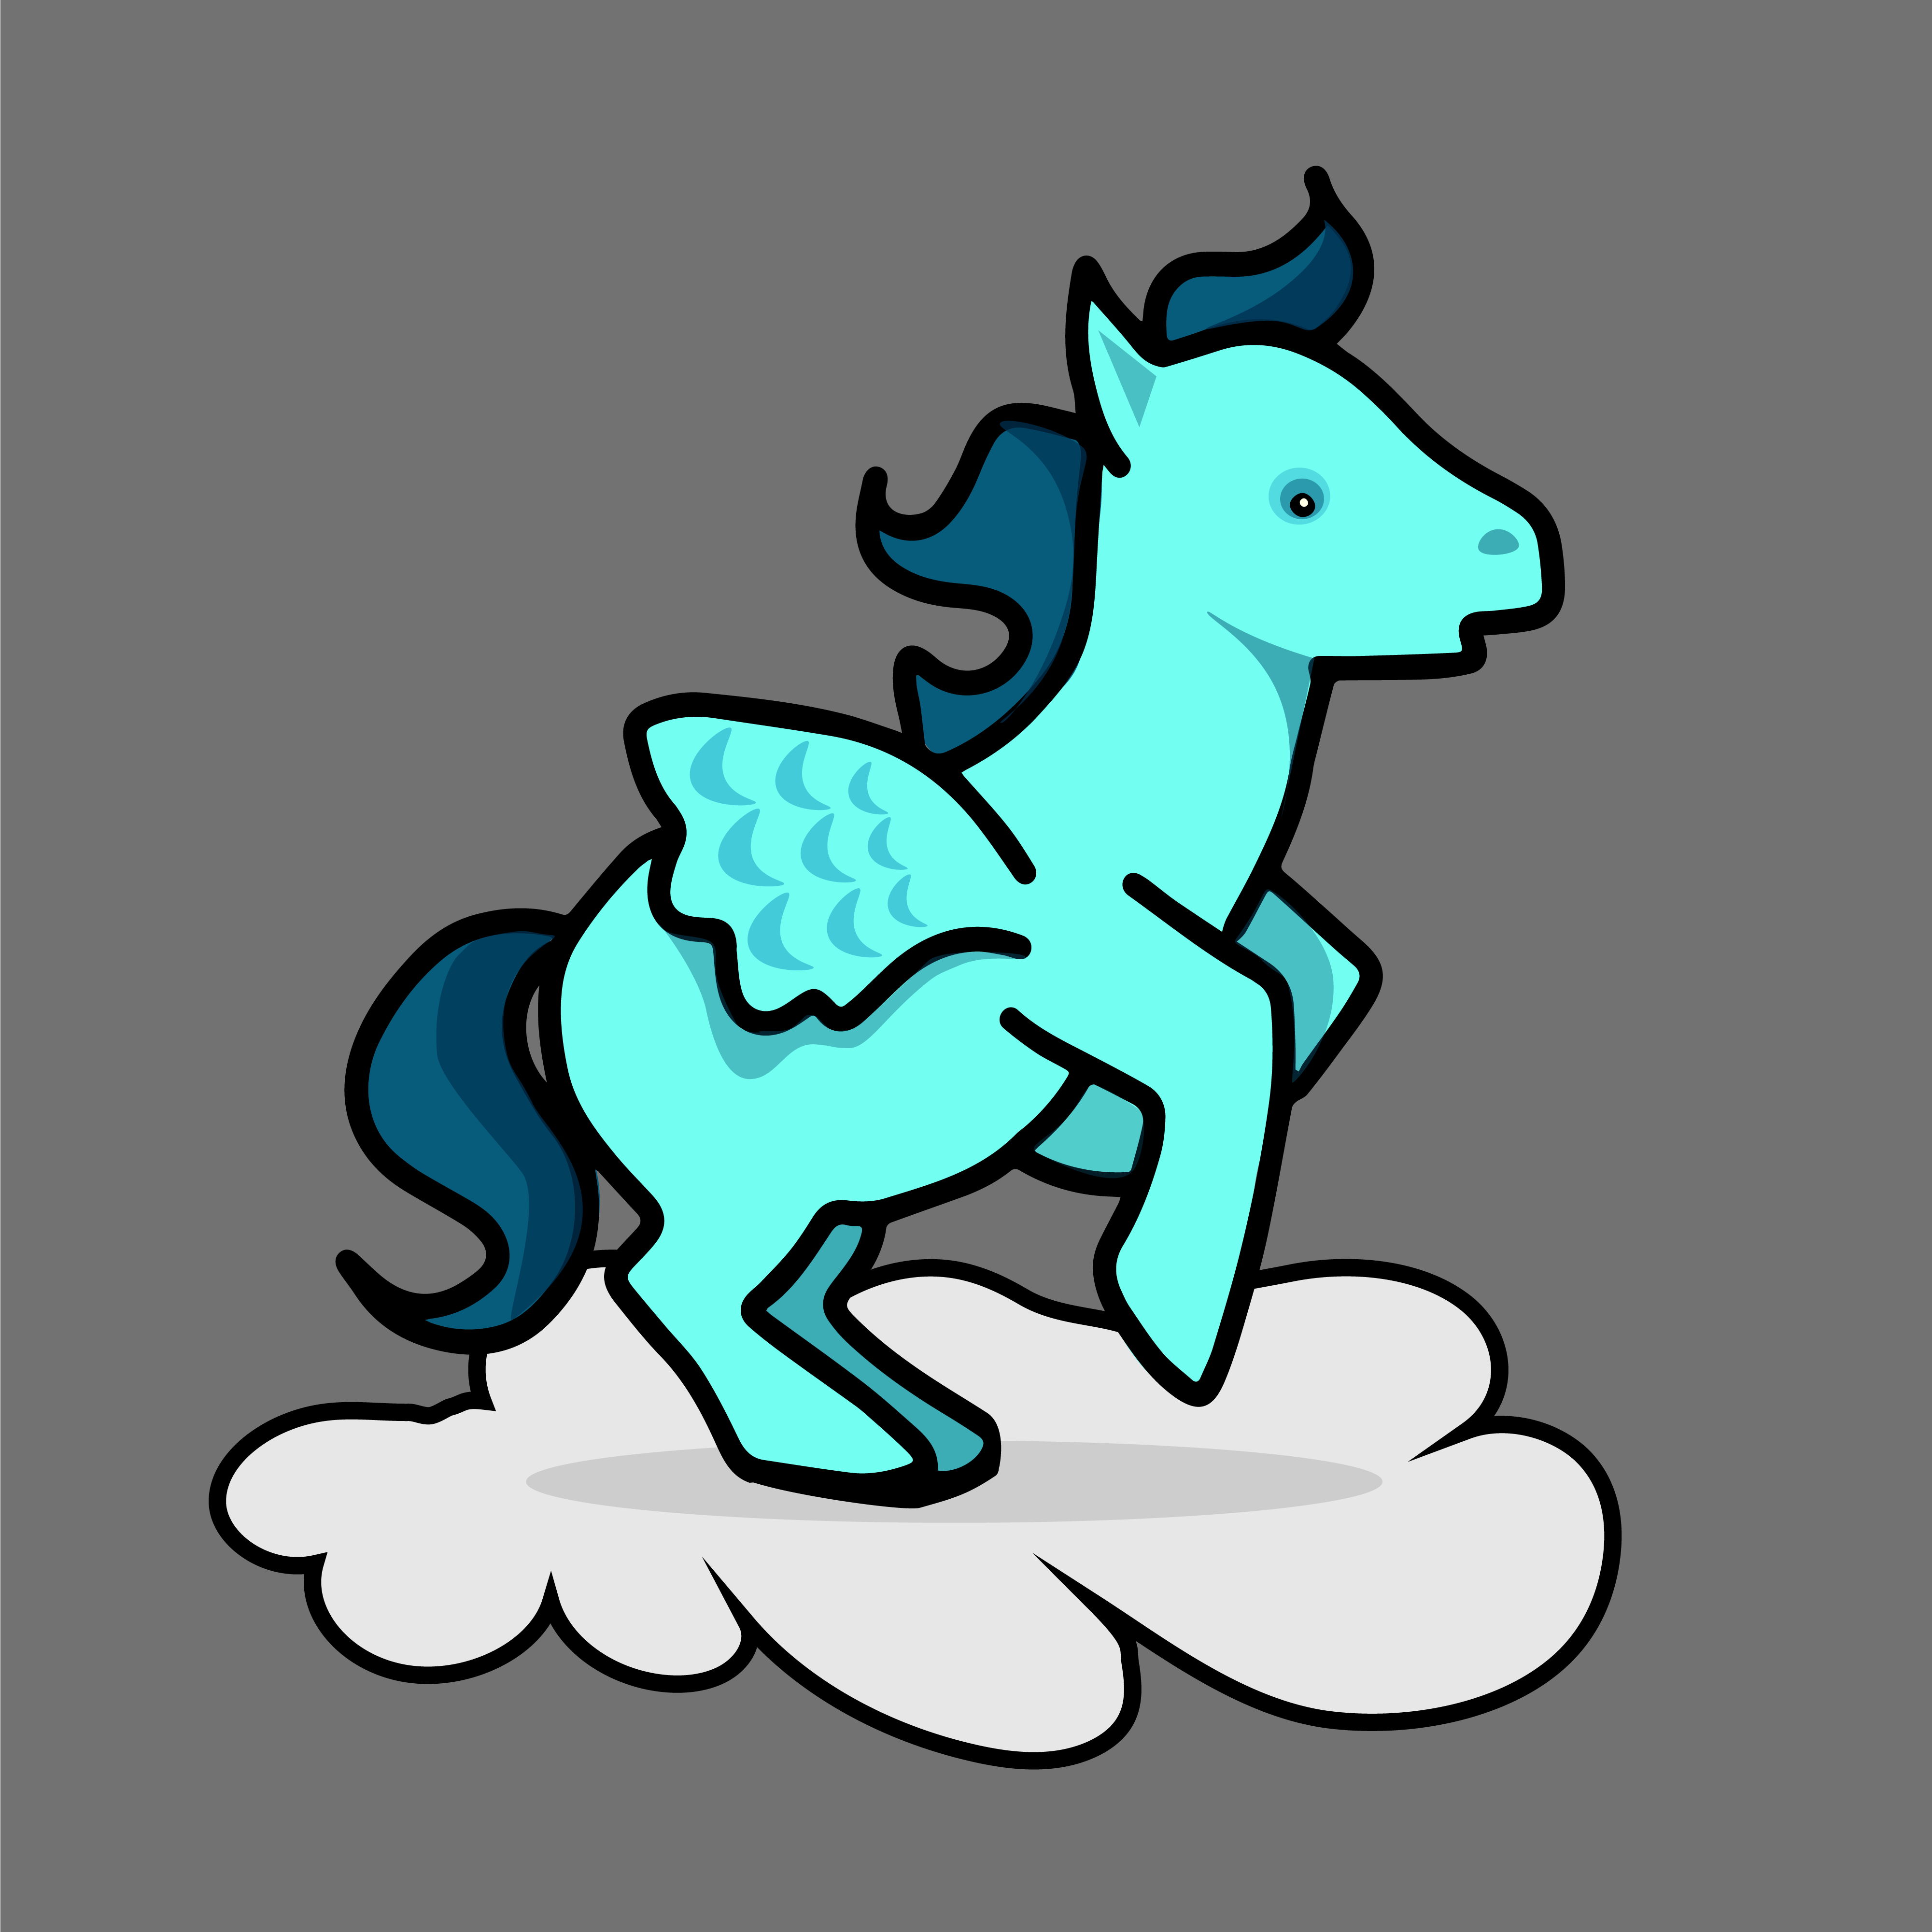 drawing of a winged pony on a cloud